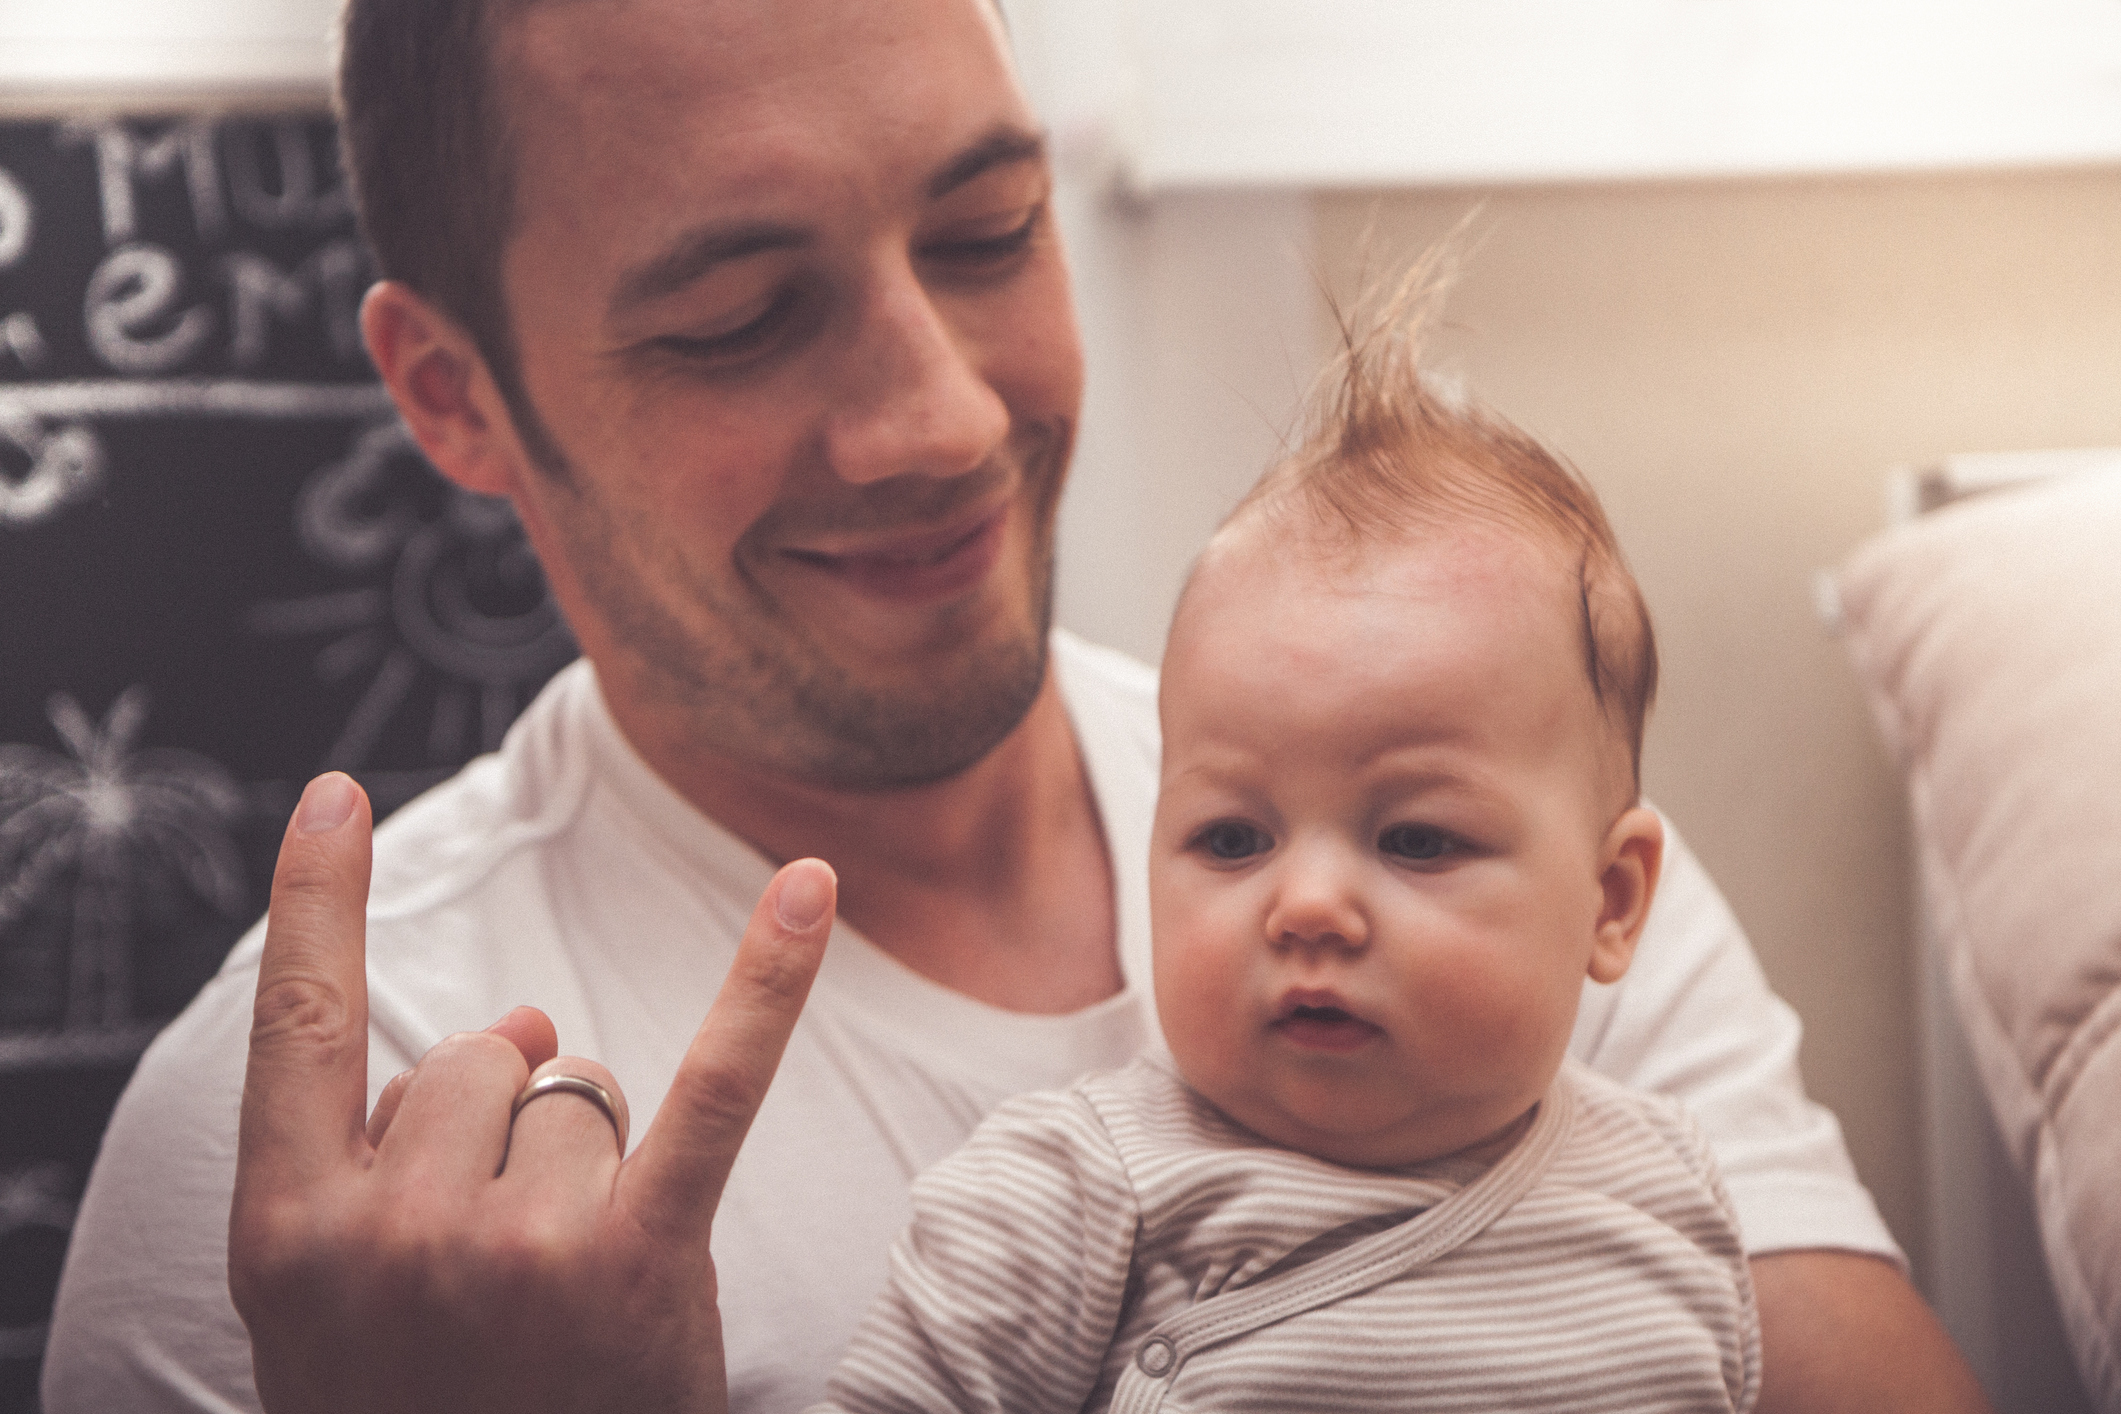 Man holding baby, both looking forward, man makes hand gesture with fingers separated